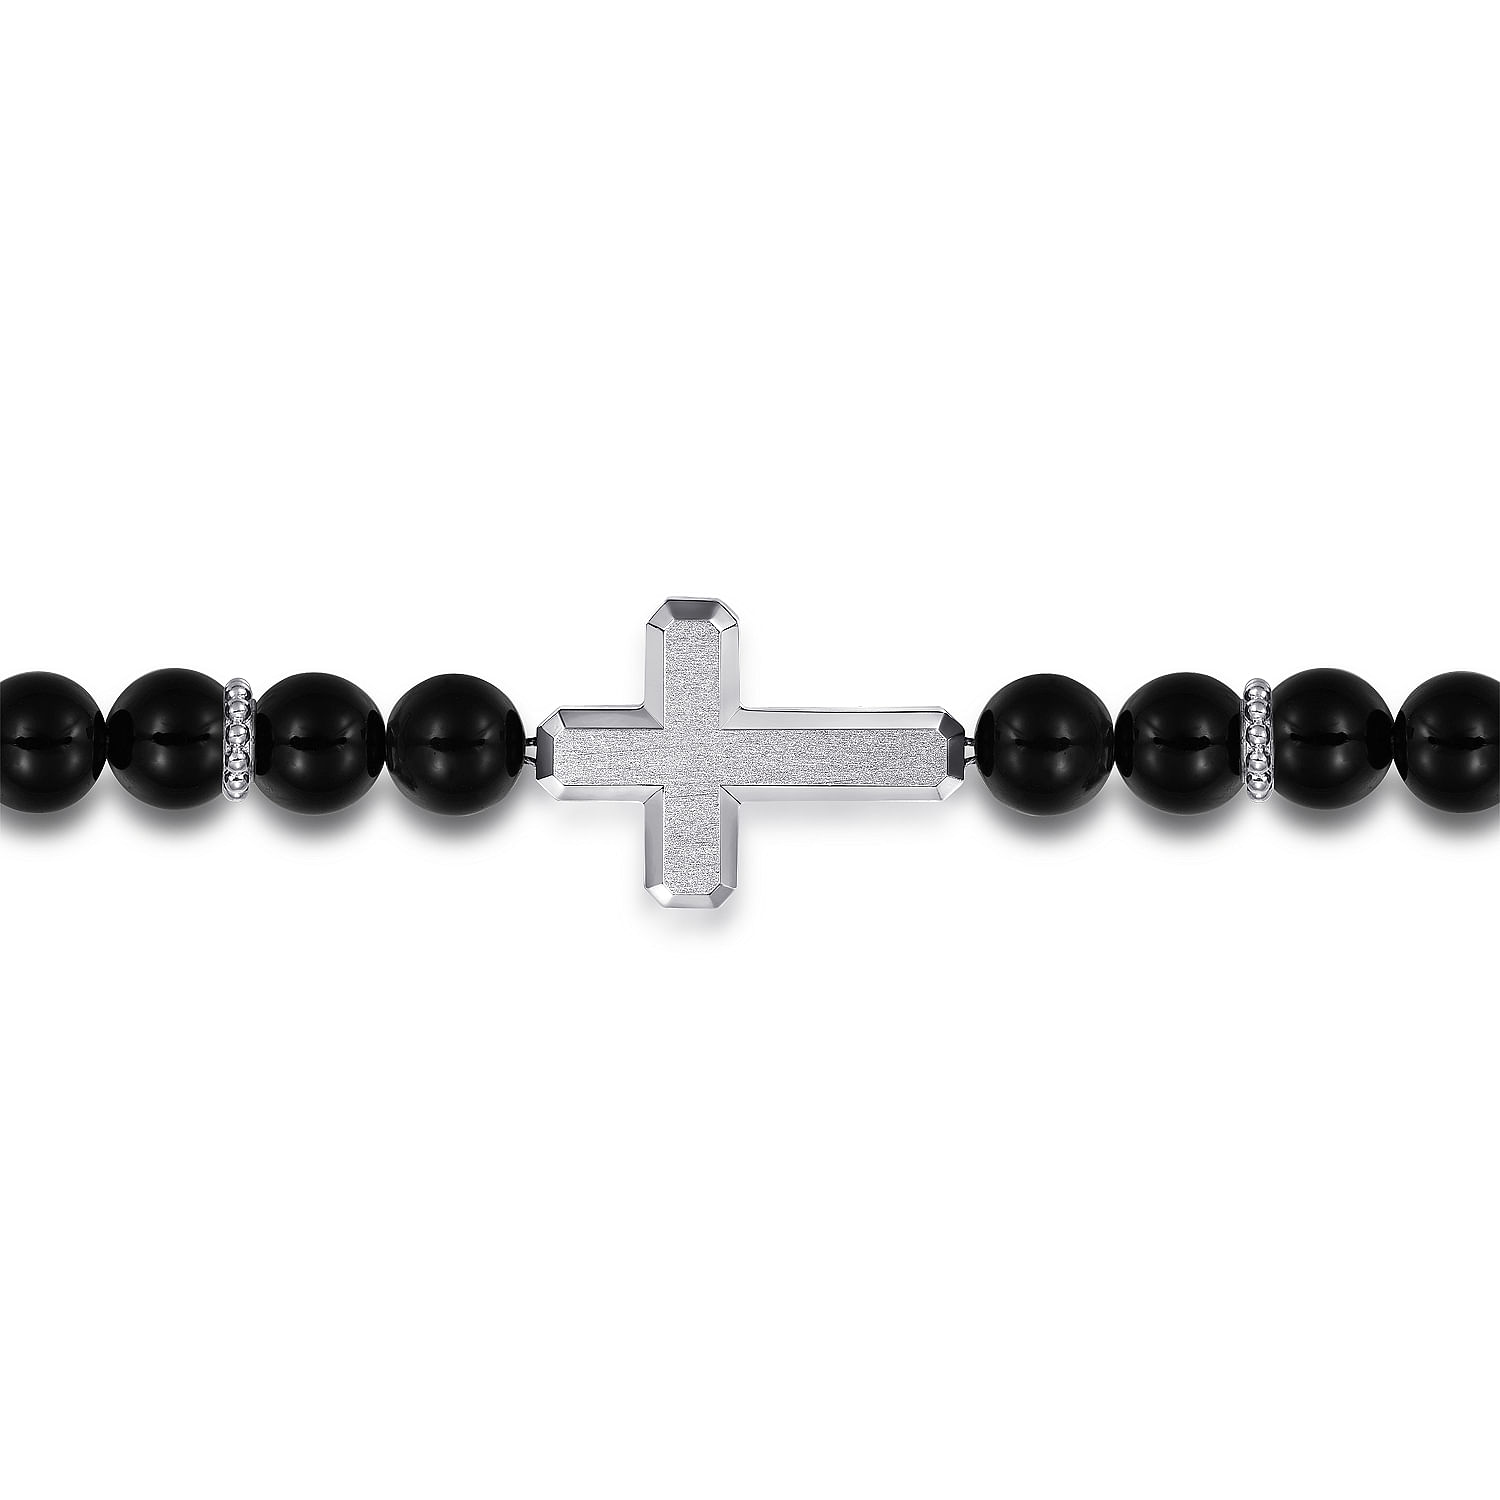 Sterling Silver and 8mm Onyx Beaded Bracelet with Cross